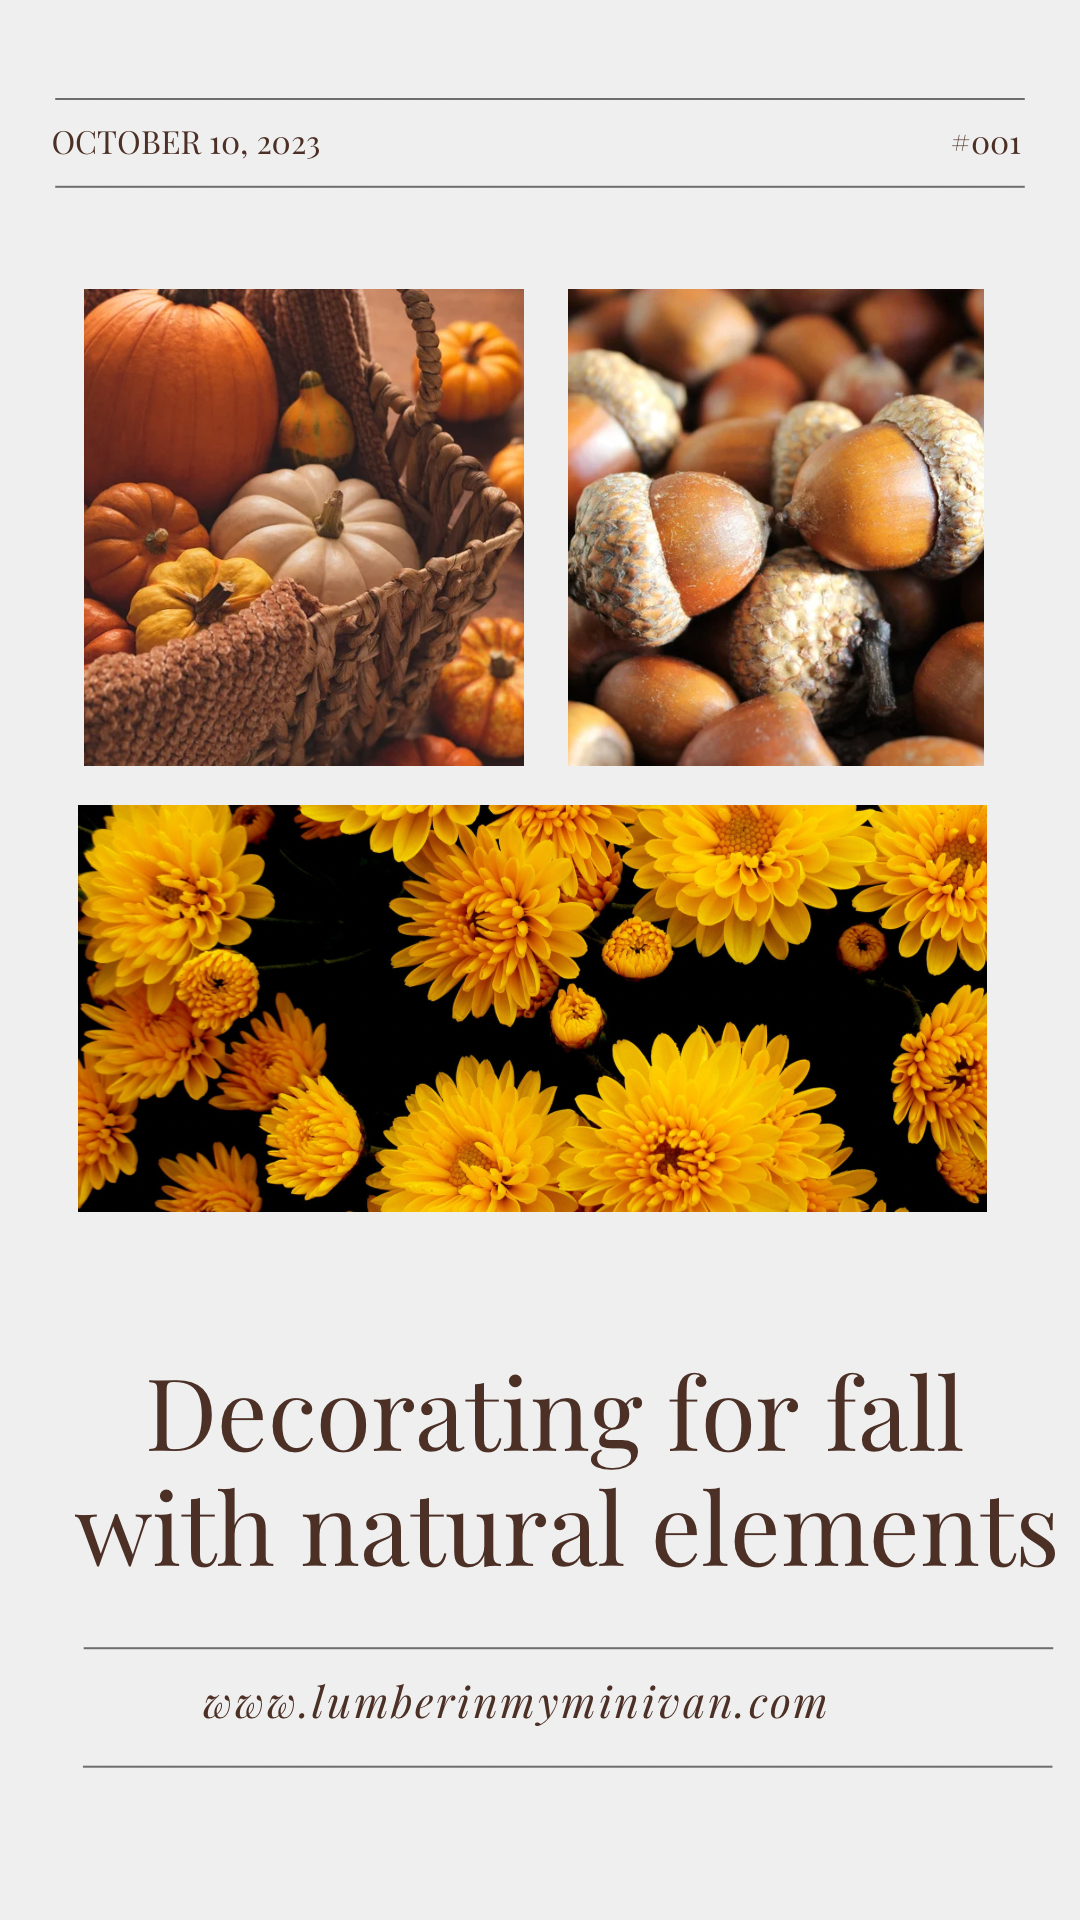 Using natural elements for fall decor